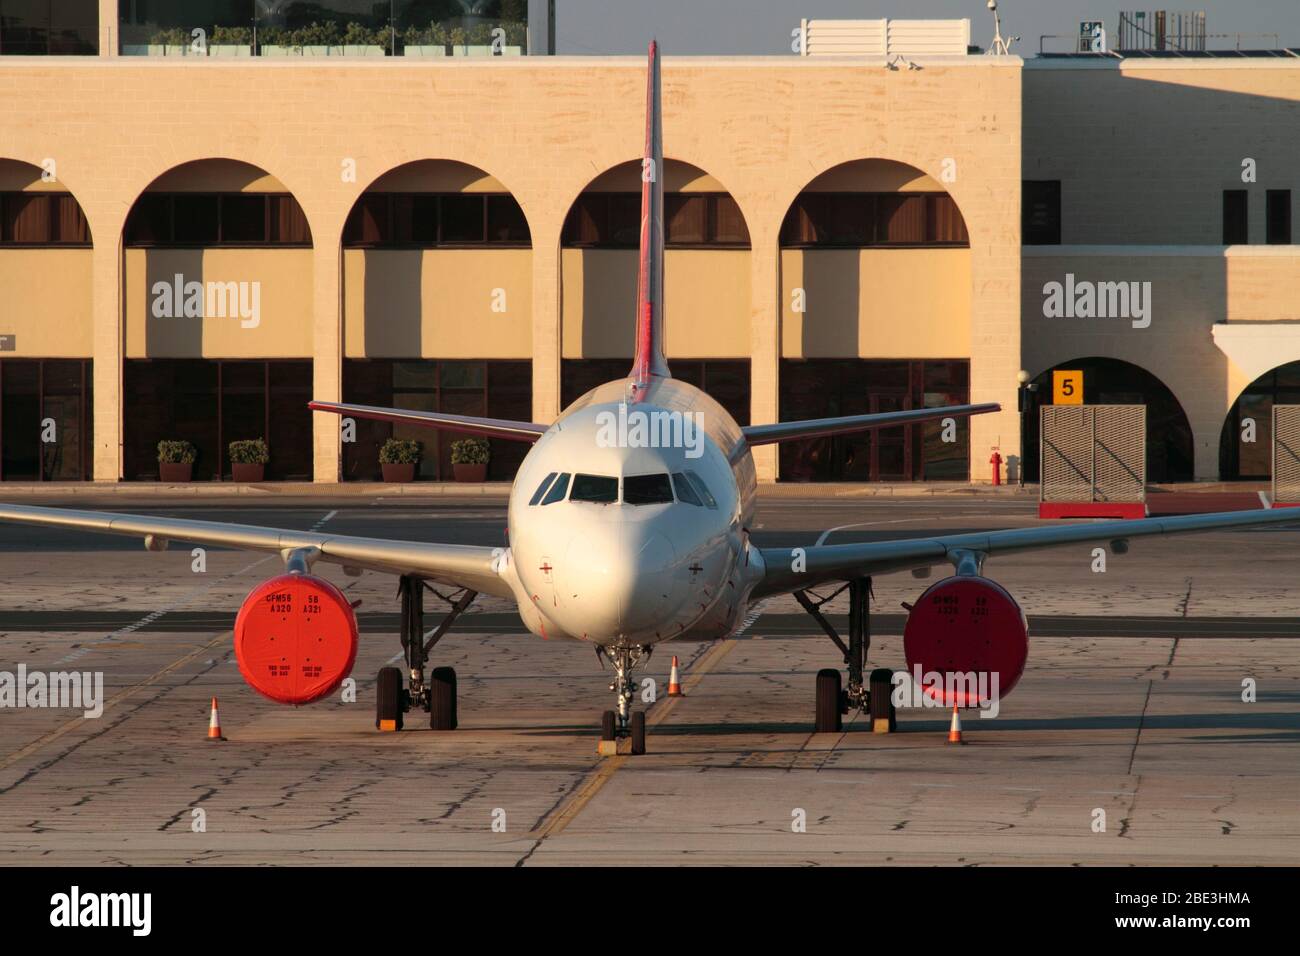 Grounded Airbus A320 passenger jet plane idle at inactive airport. No proprietary details visible. Effect of COVID-19 coronavirus on air travel. Stock Photo